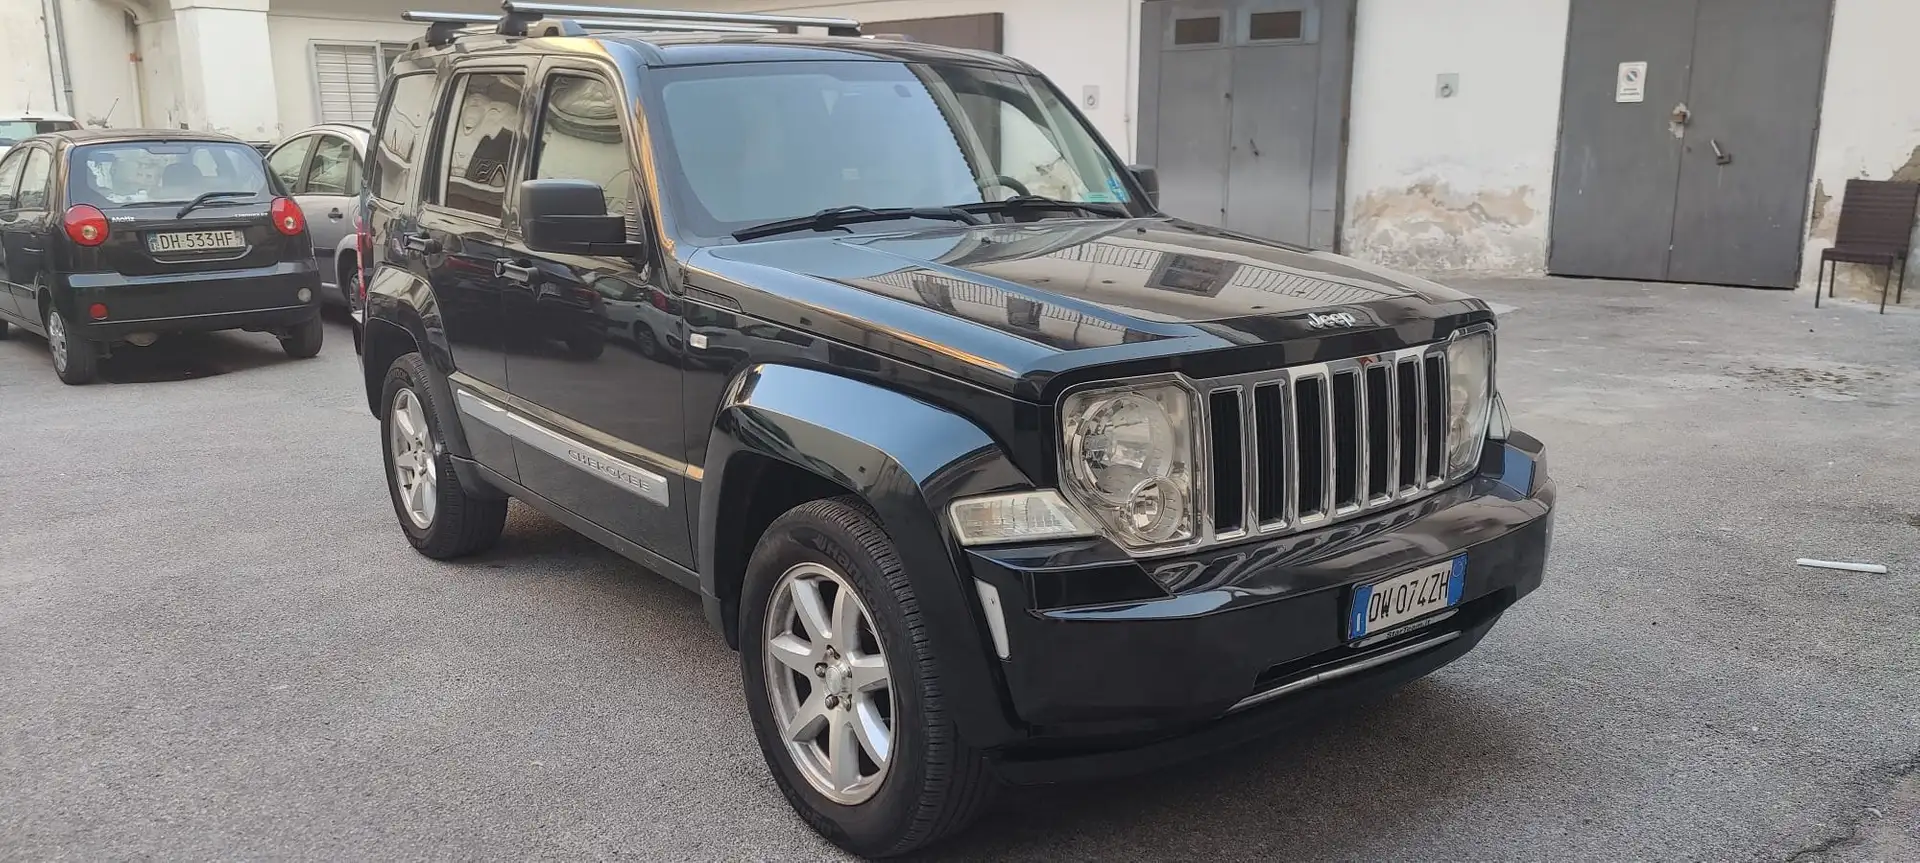 Jeep Cherokee Cherokee 2.8 crd Limited auto dpf Fekete - 1